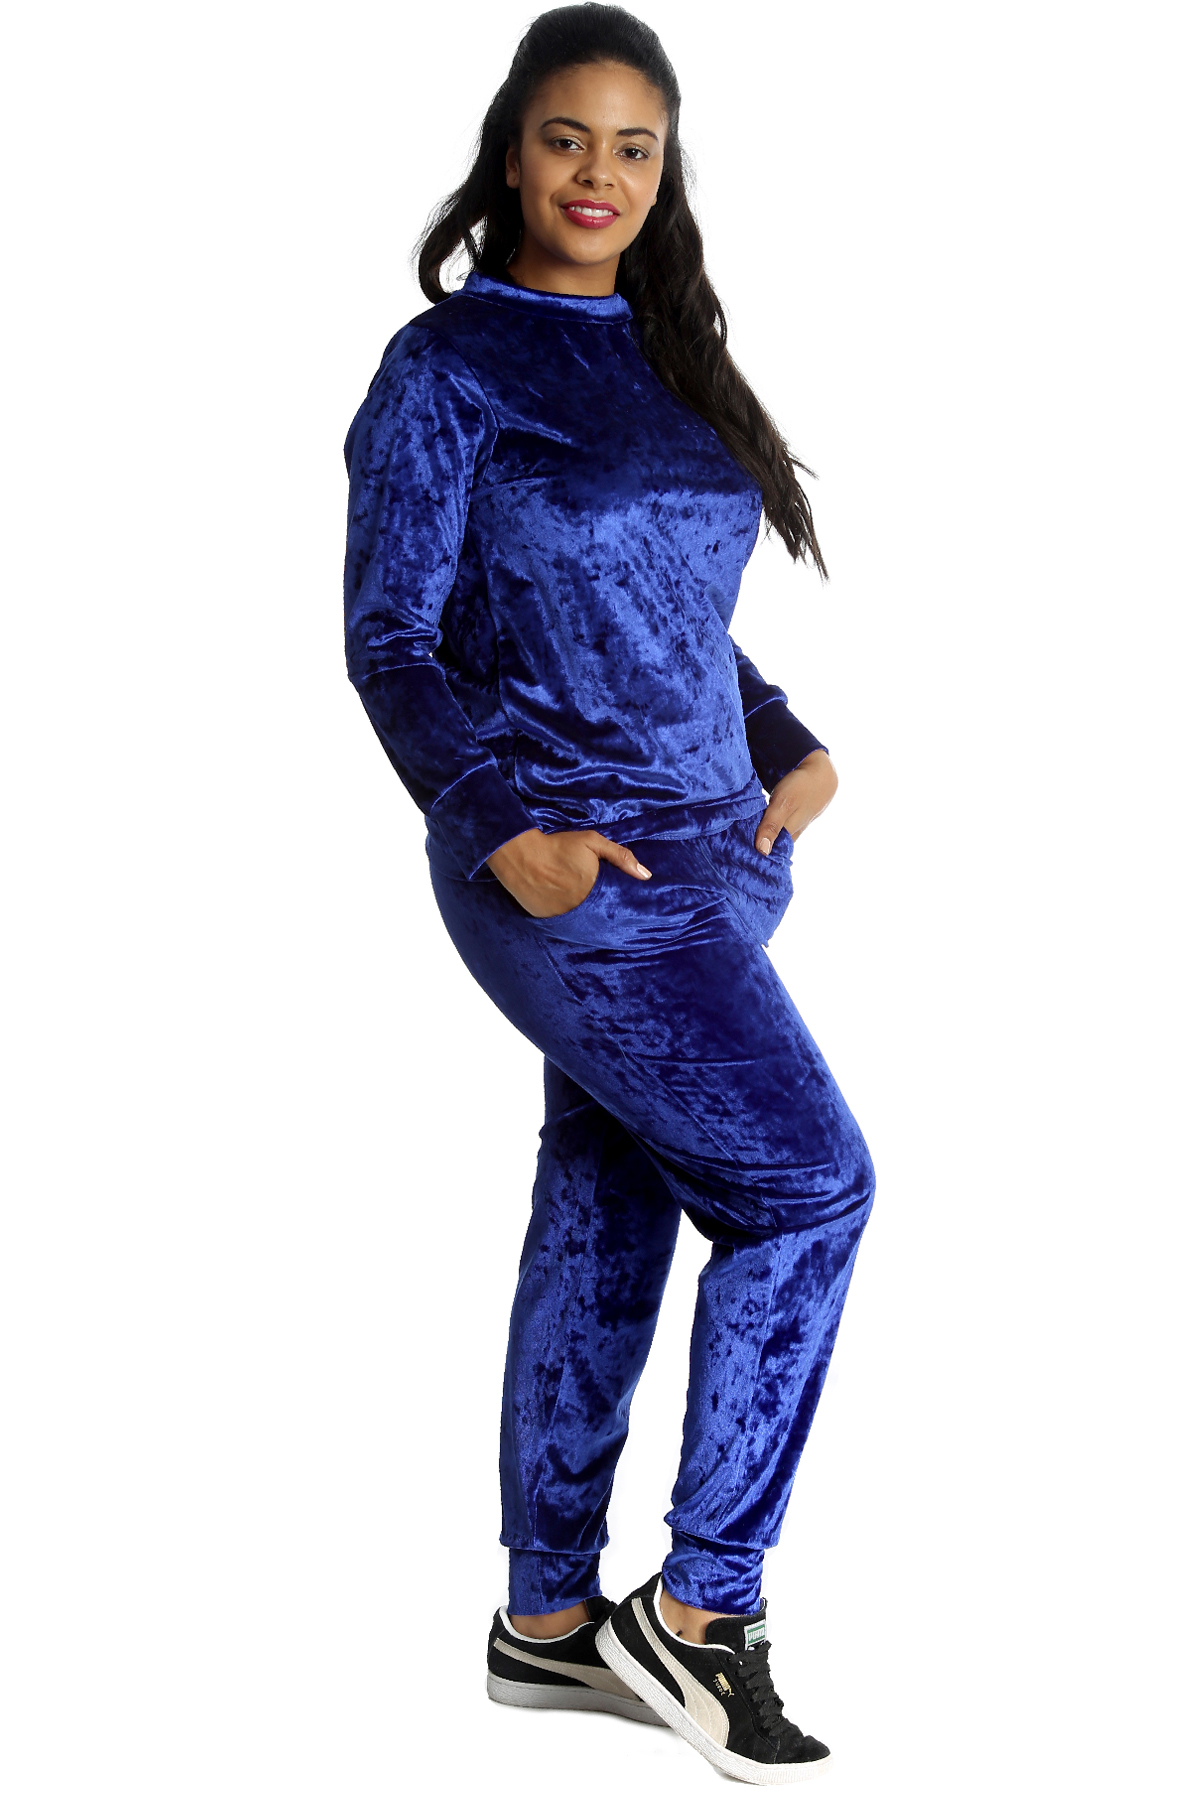 New Ladies Tracksuit Plus Size Womens Velvet Top & Bottoms Warm Cuffed ...